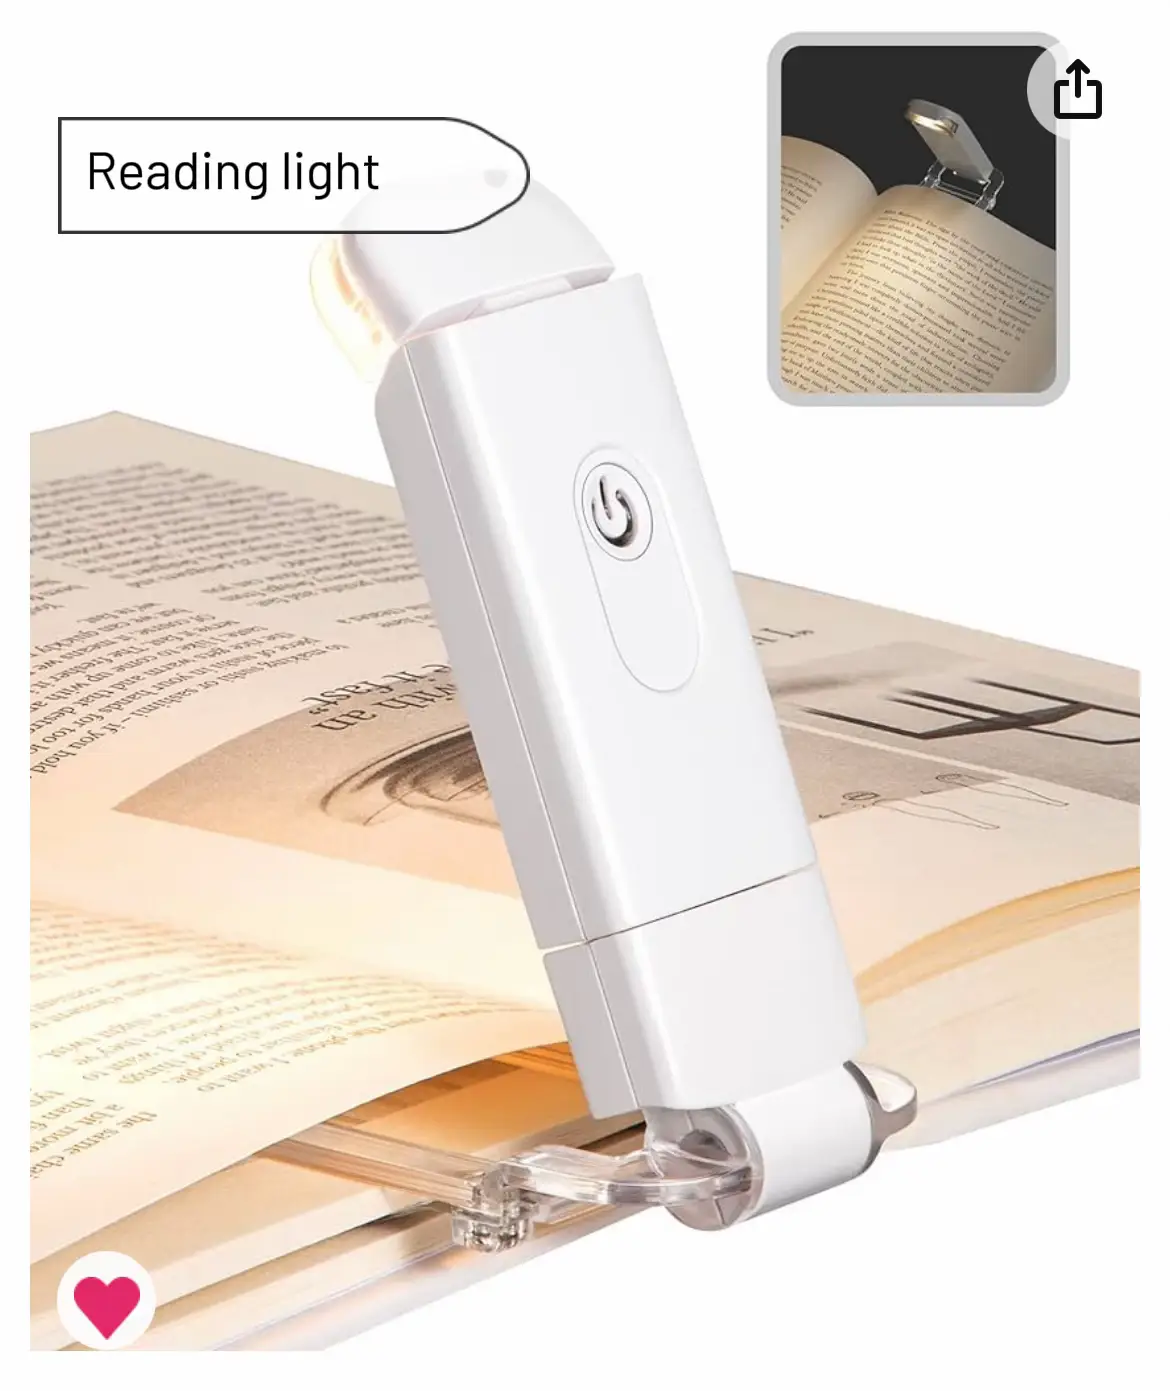  A cell phone with a book on it.